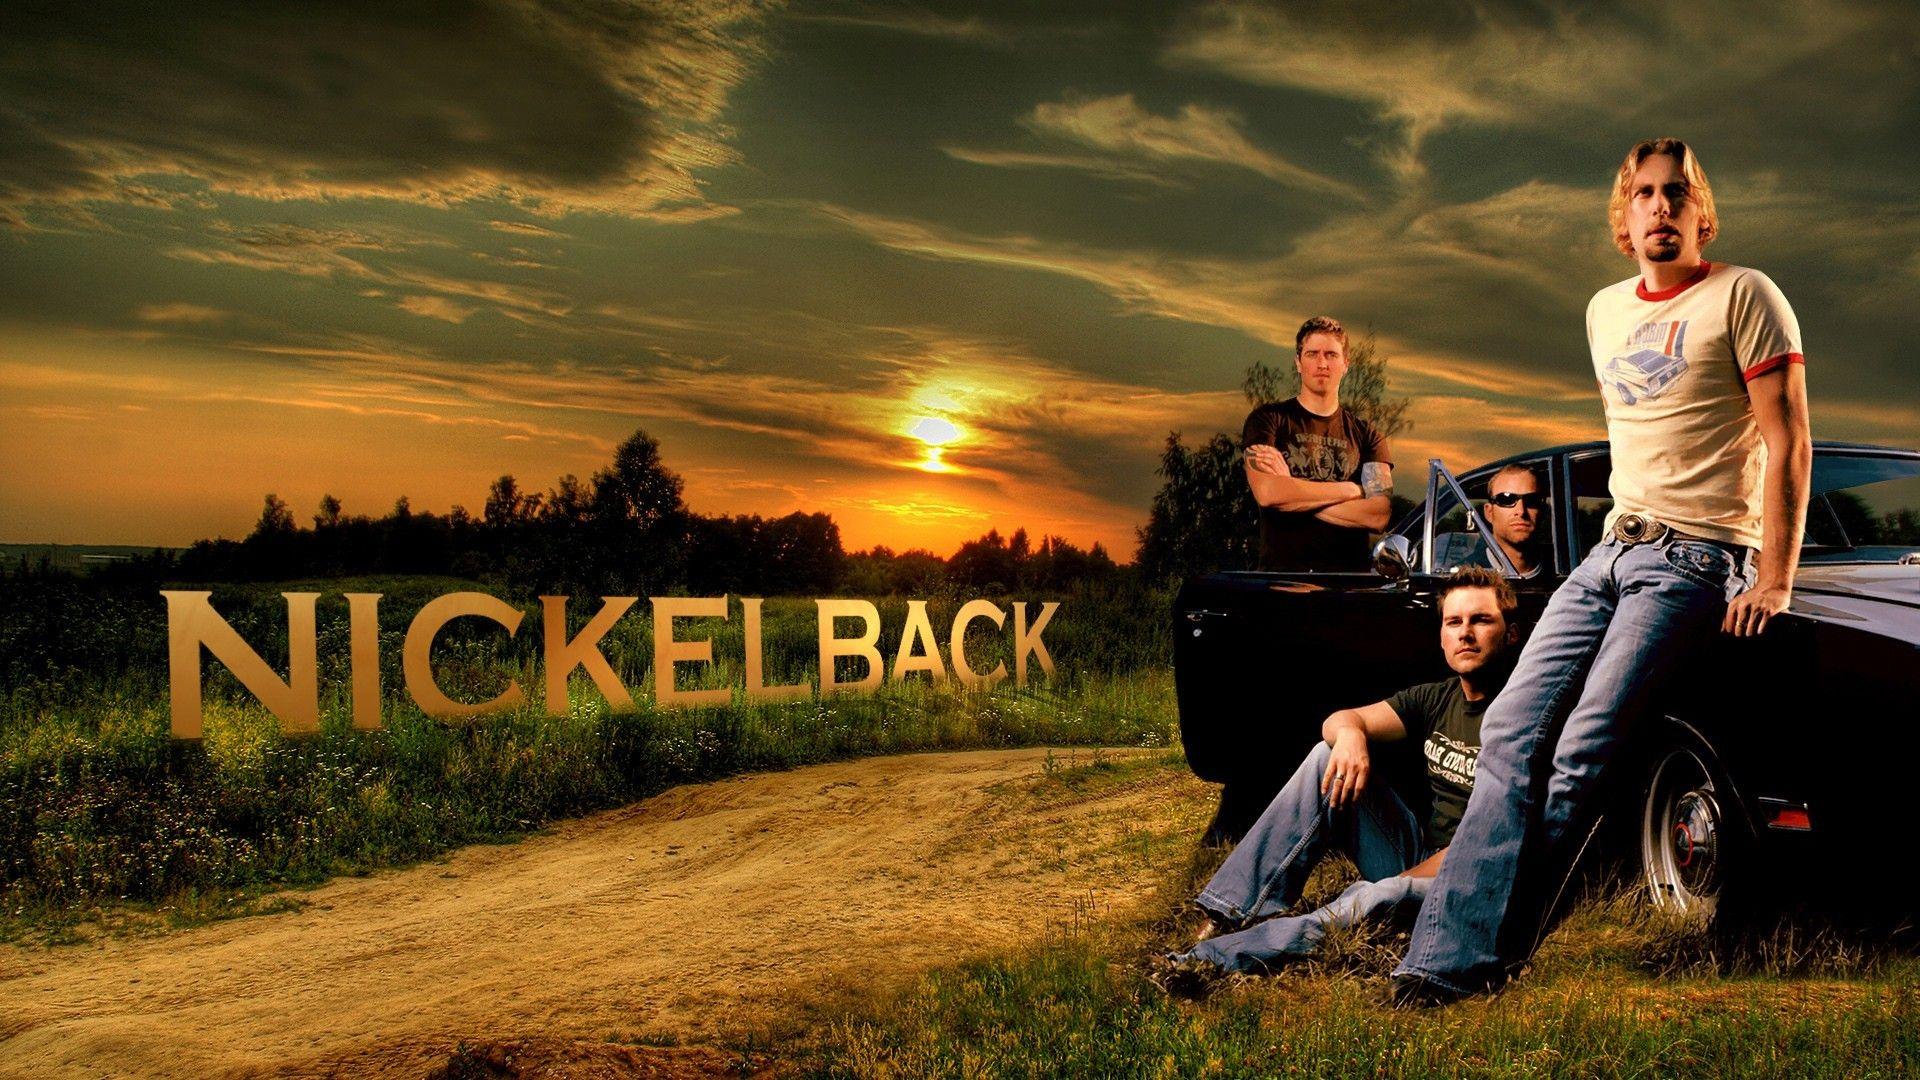 Nickelback Wallpaper, High Quality Photo of Nickelback in Best